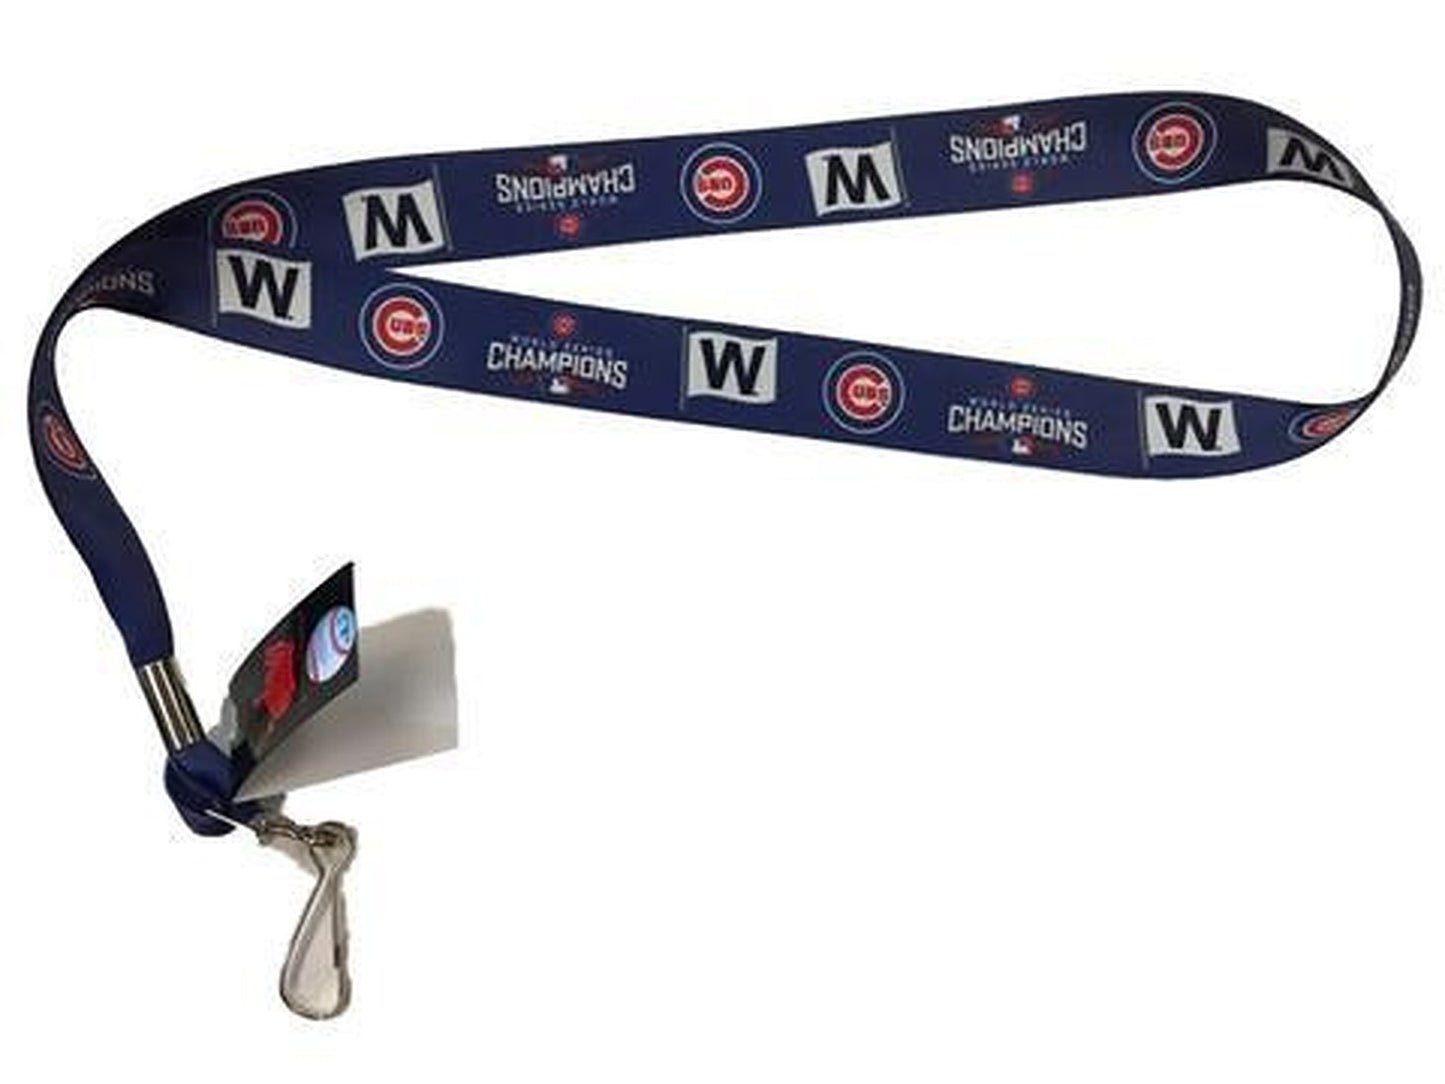 Chicago Cubs 2016 World Series Champions “W” Lanyard By Aminco